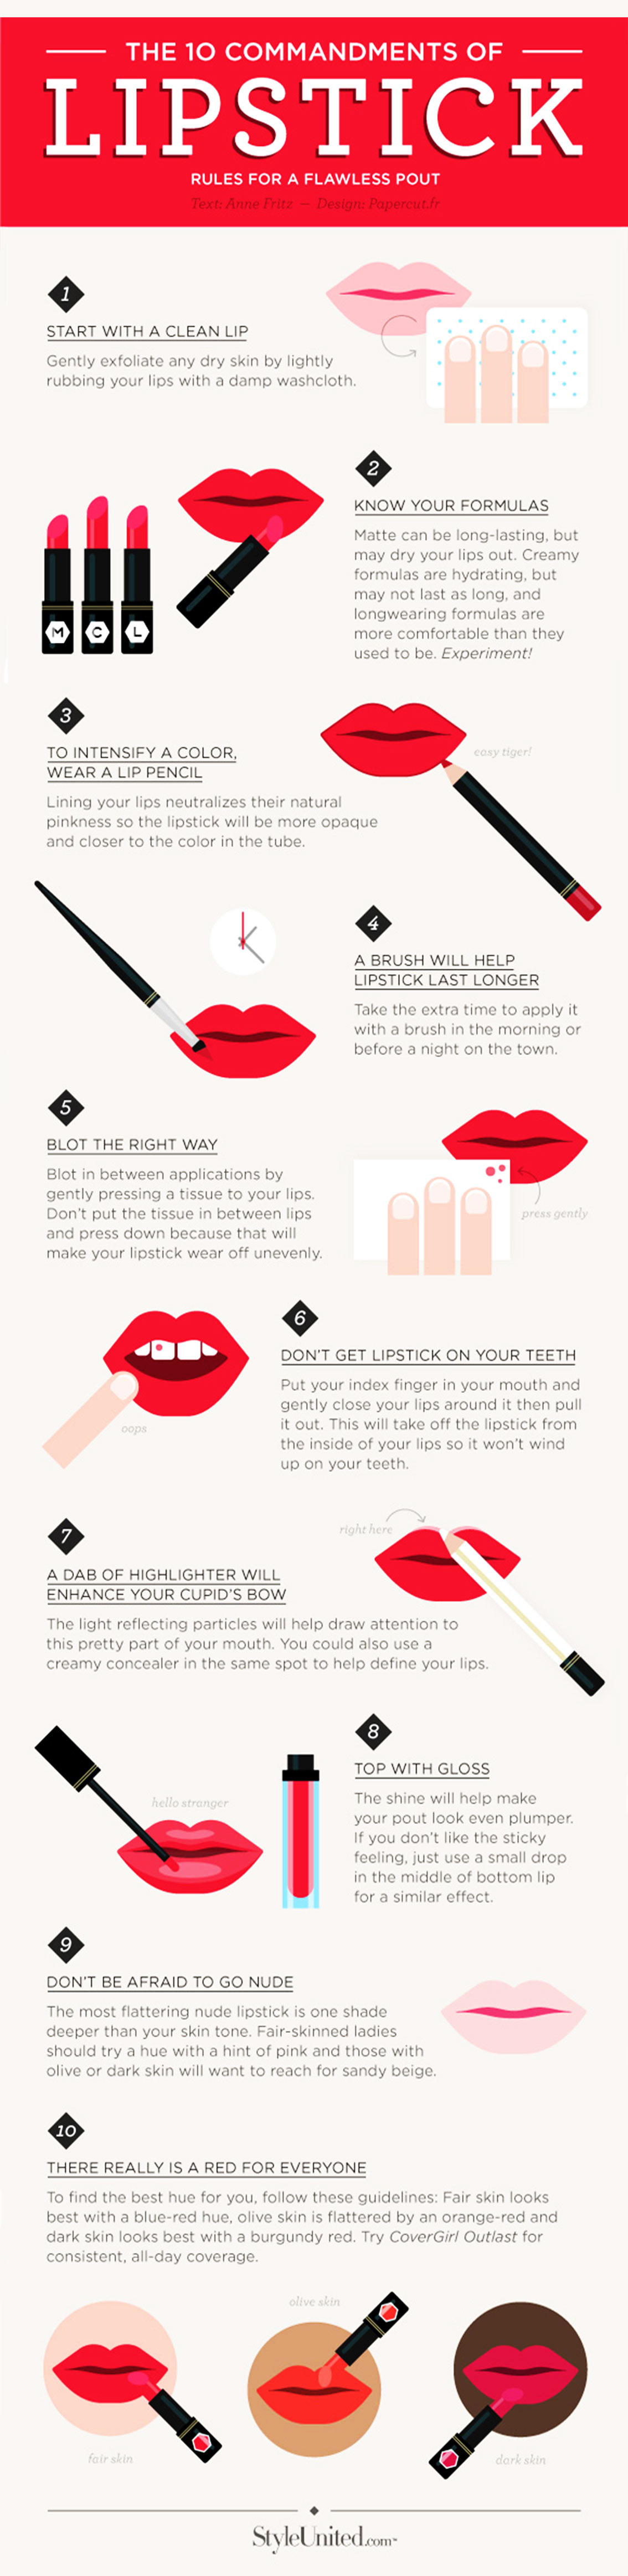 Rules on Applying Red Lipstick Perfectly - Beauty Infographic